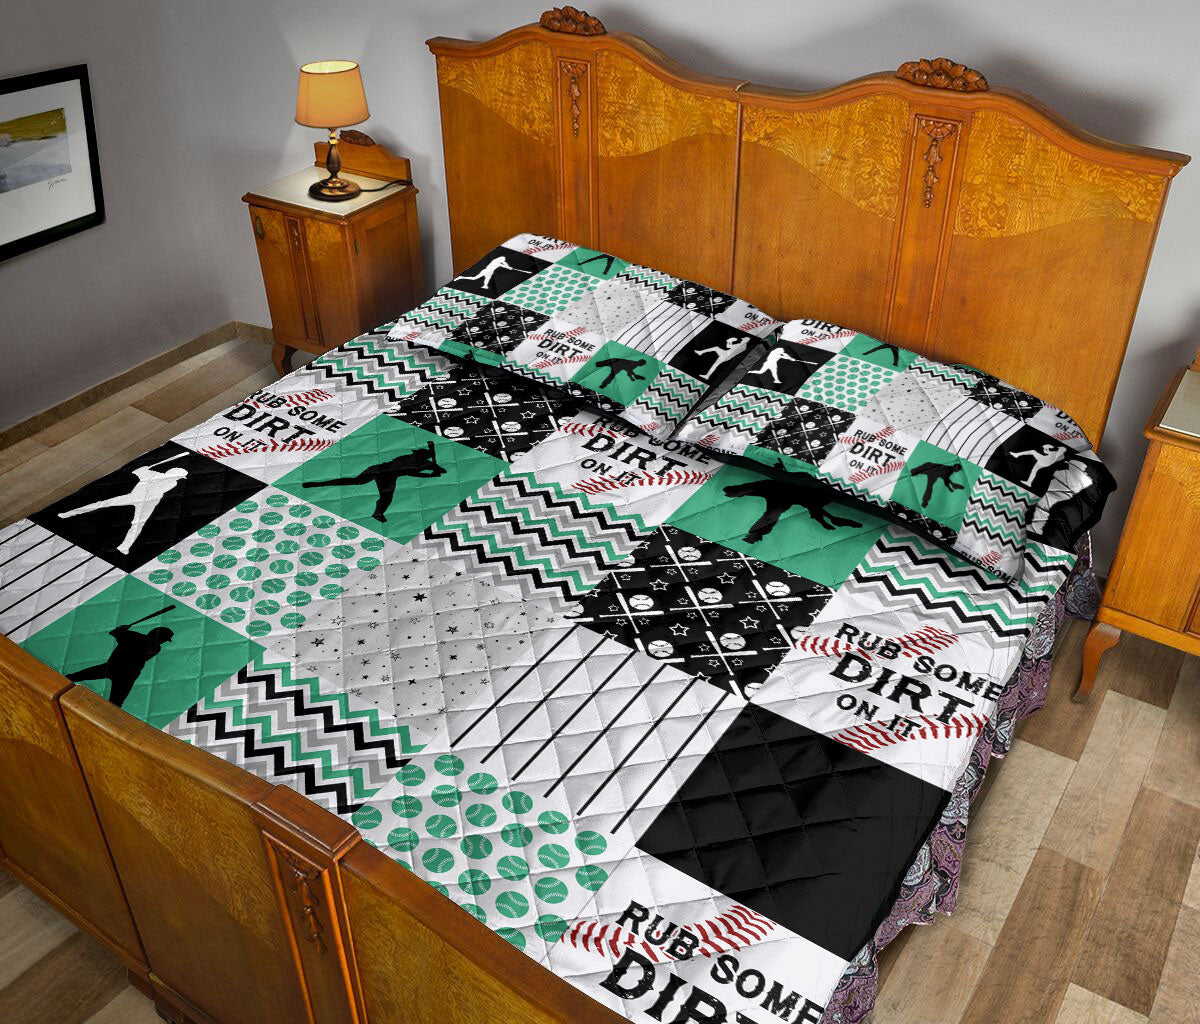 Ohaprints-Quilt-Bed-Set-Pillowcase-Baseball-Patchwork-Pattern-Sports-Lover-Gift-Blanket-Bedspread-Bedding-2439-Queen (80'' x 90'')